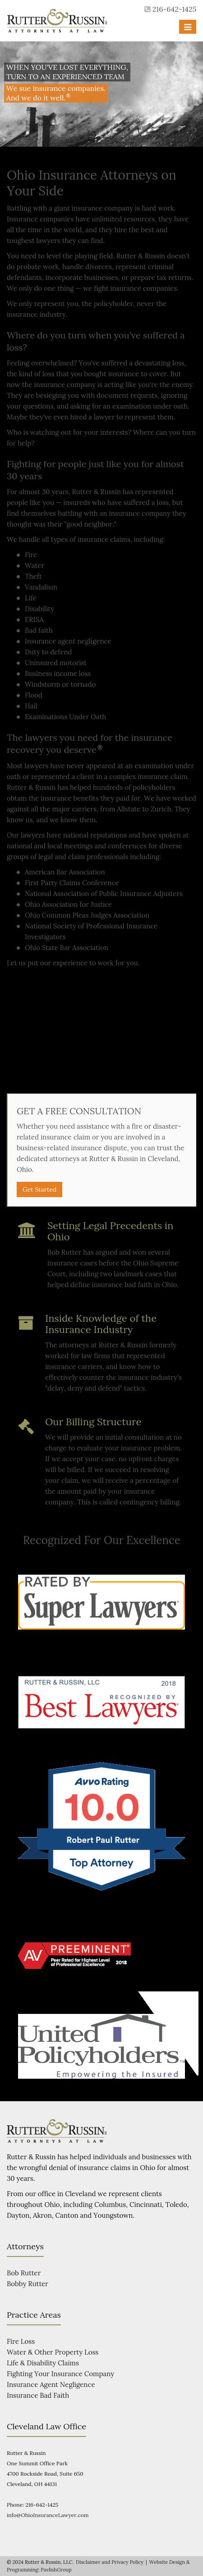 Rutter & Russin, LLC - Cleveland OH Lawyers